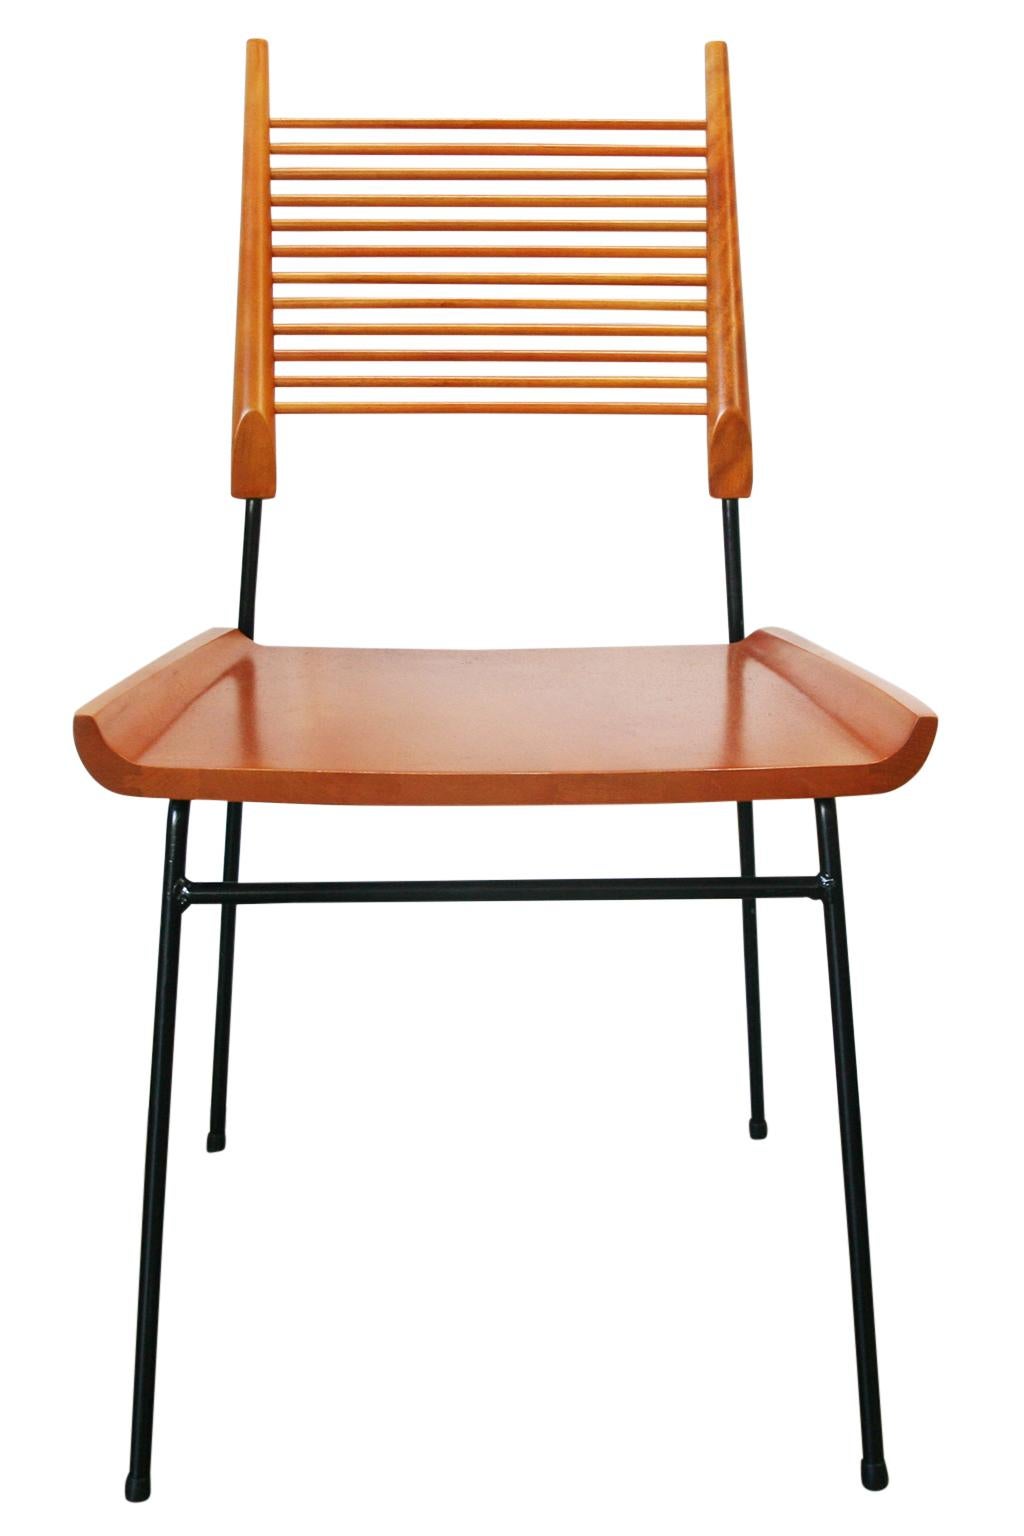 For your consideration are these professionally restored midcentury maple and iron Paul McCobb Planner Group #1533 shovel side dining chairs. Solid maple seat and Minimalist spindle backrest attached to an Iron base. Each chair is fully restored